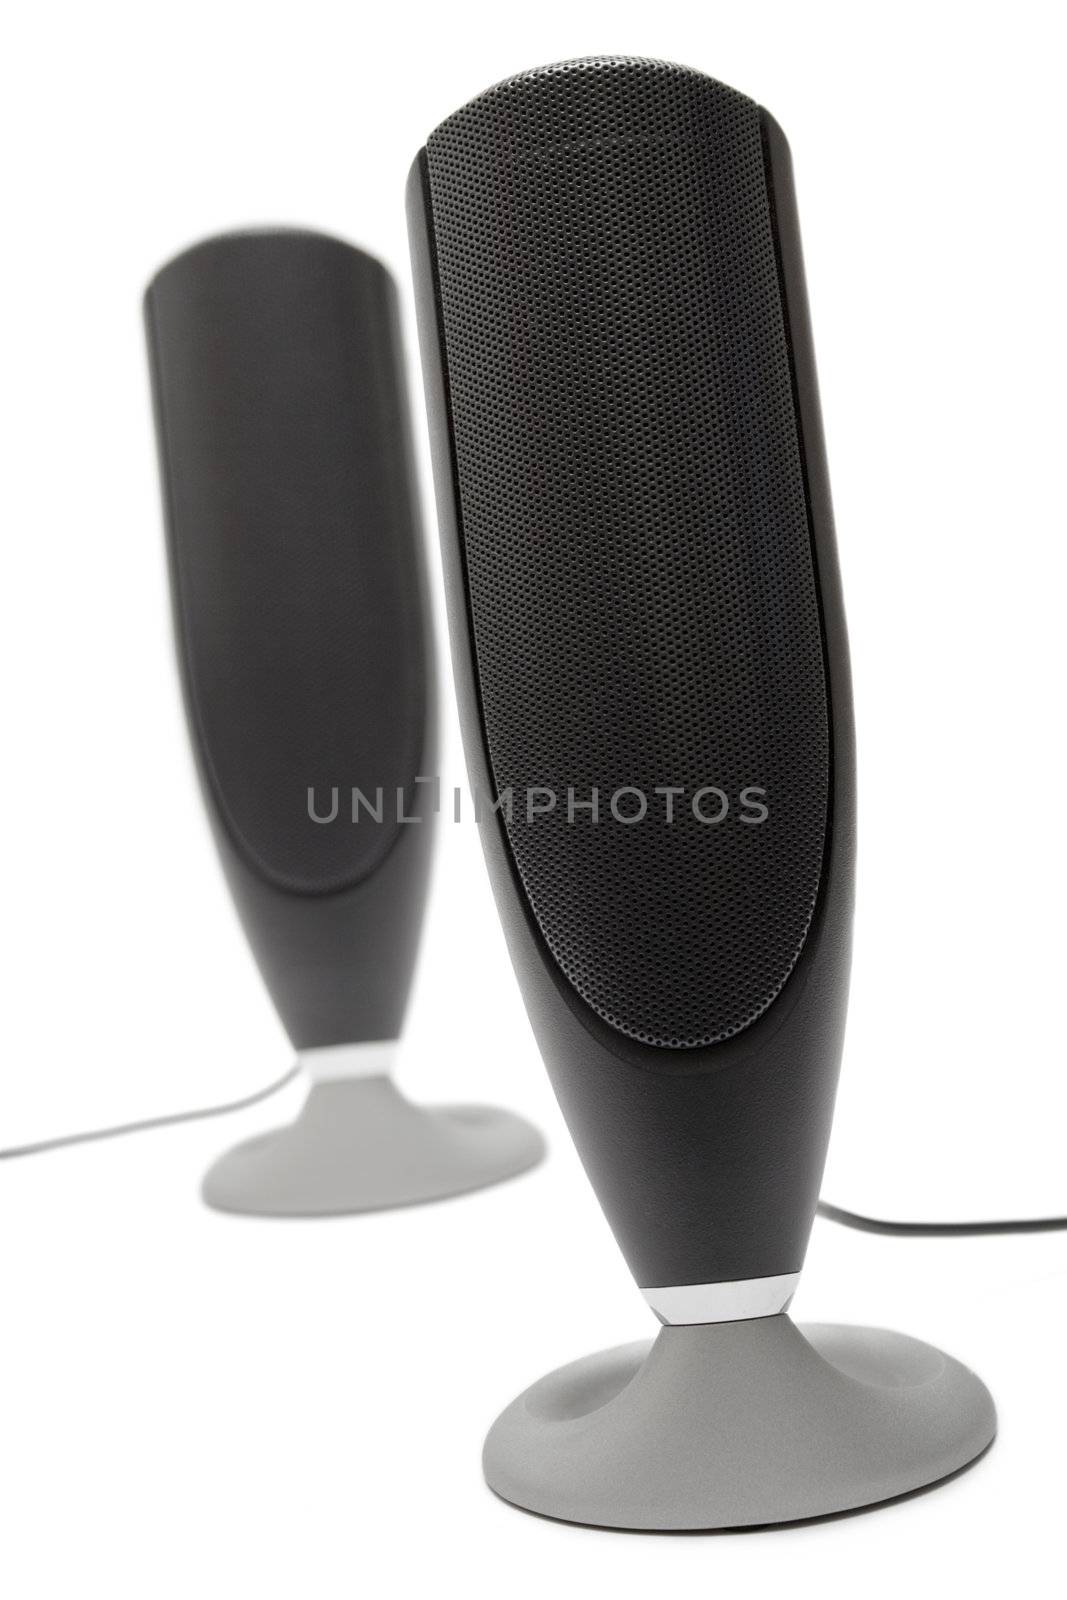 Two small black speakers isolated on a white background.